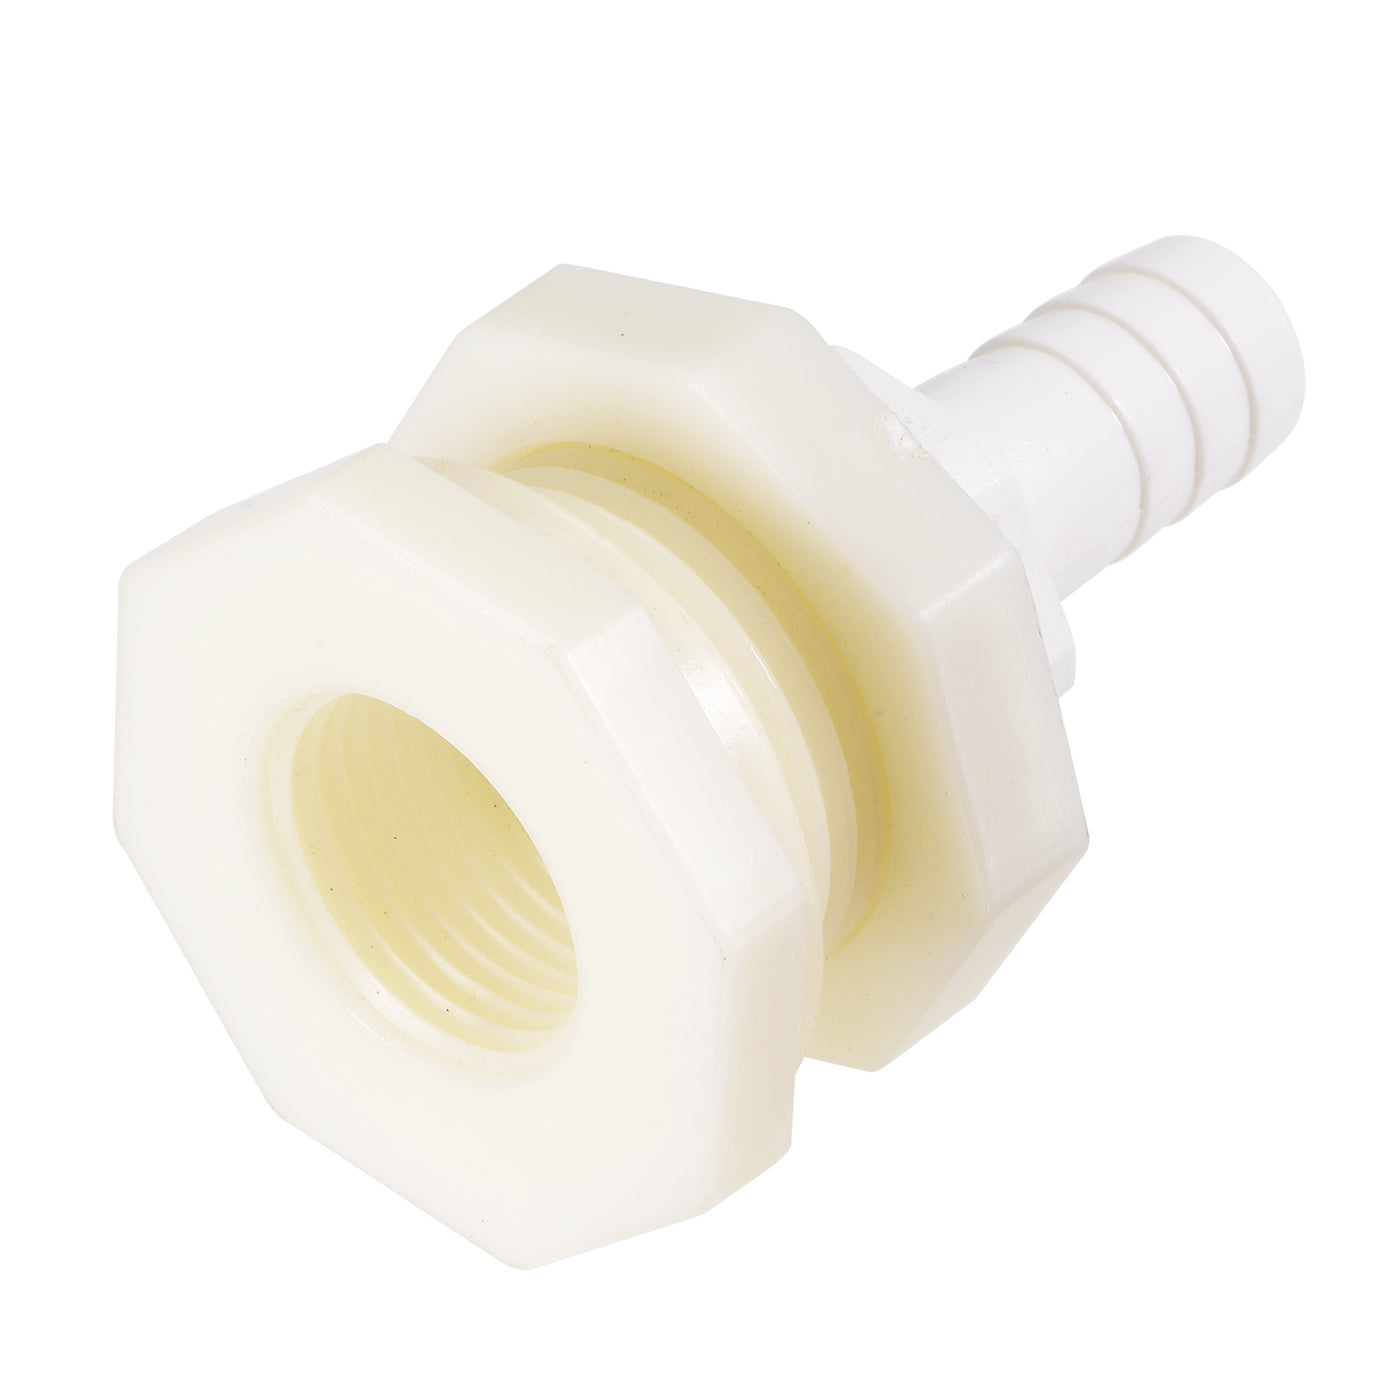 uxcell Uxcell Bulkhead Fitting Adapter 12mm Barbed x G1/2 Female ABS White for Aquariums, Water Tanks, Tubs, Pools